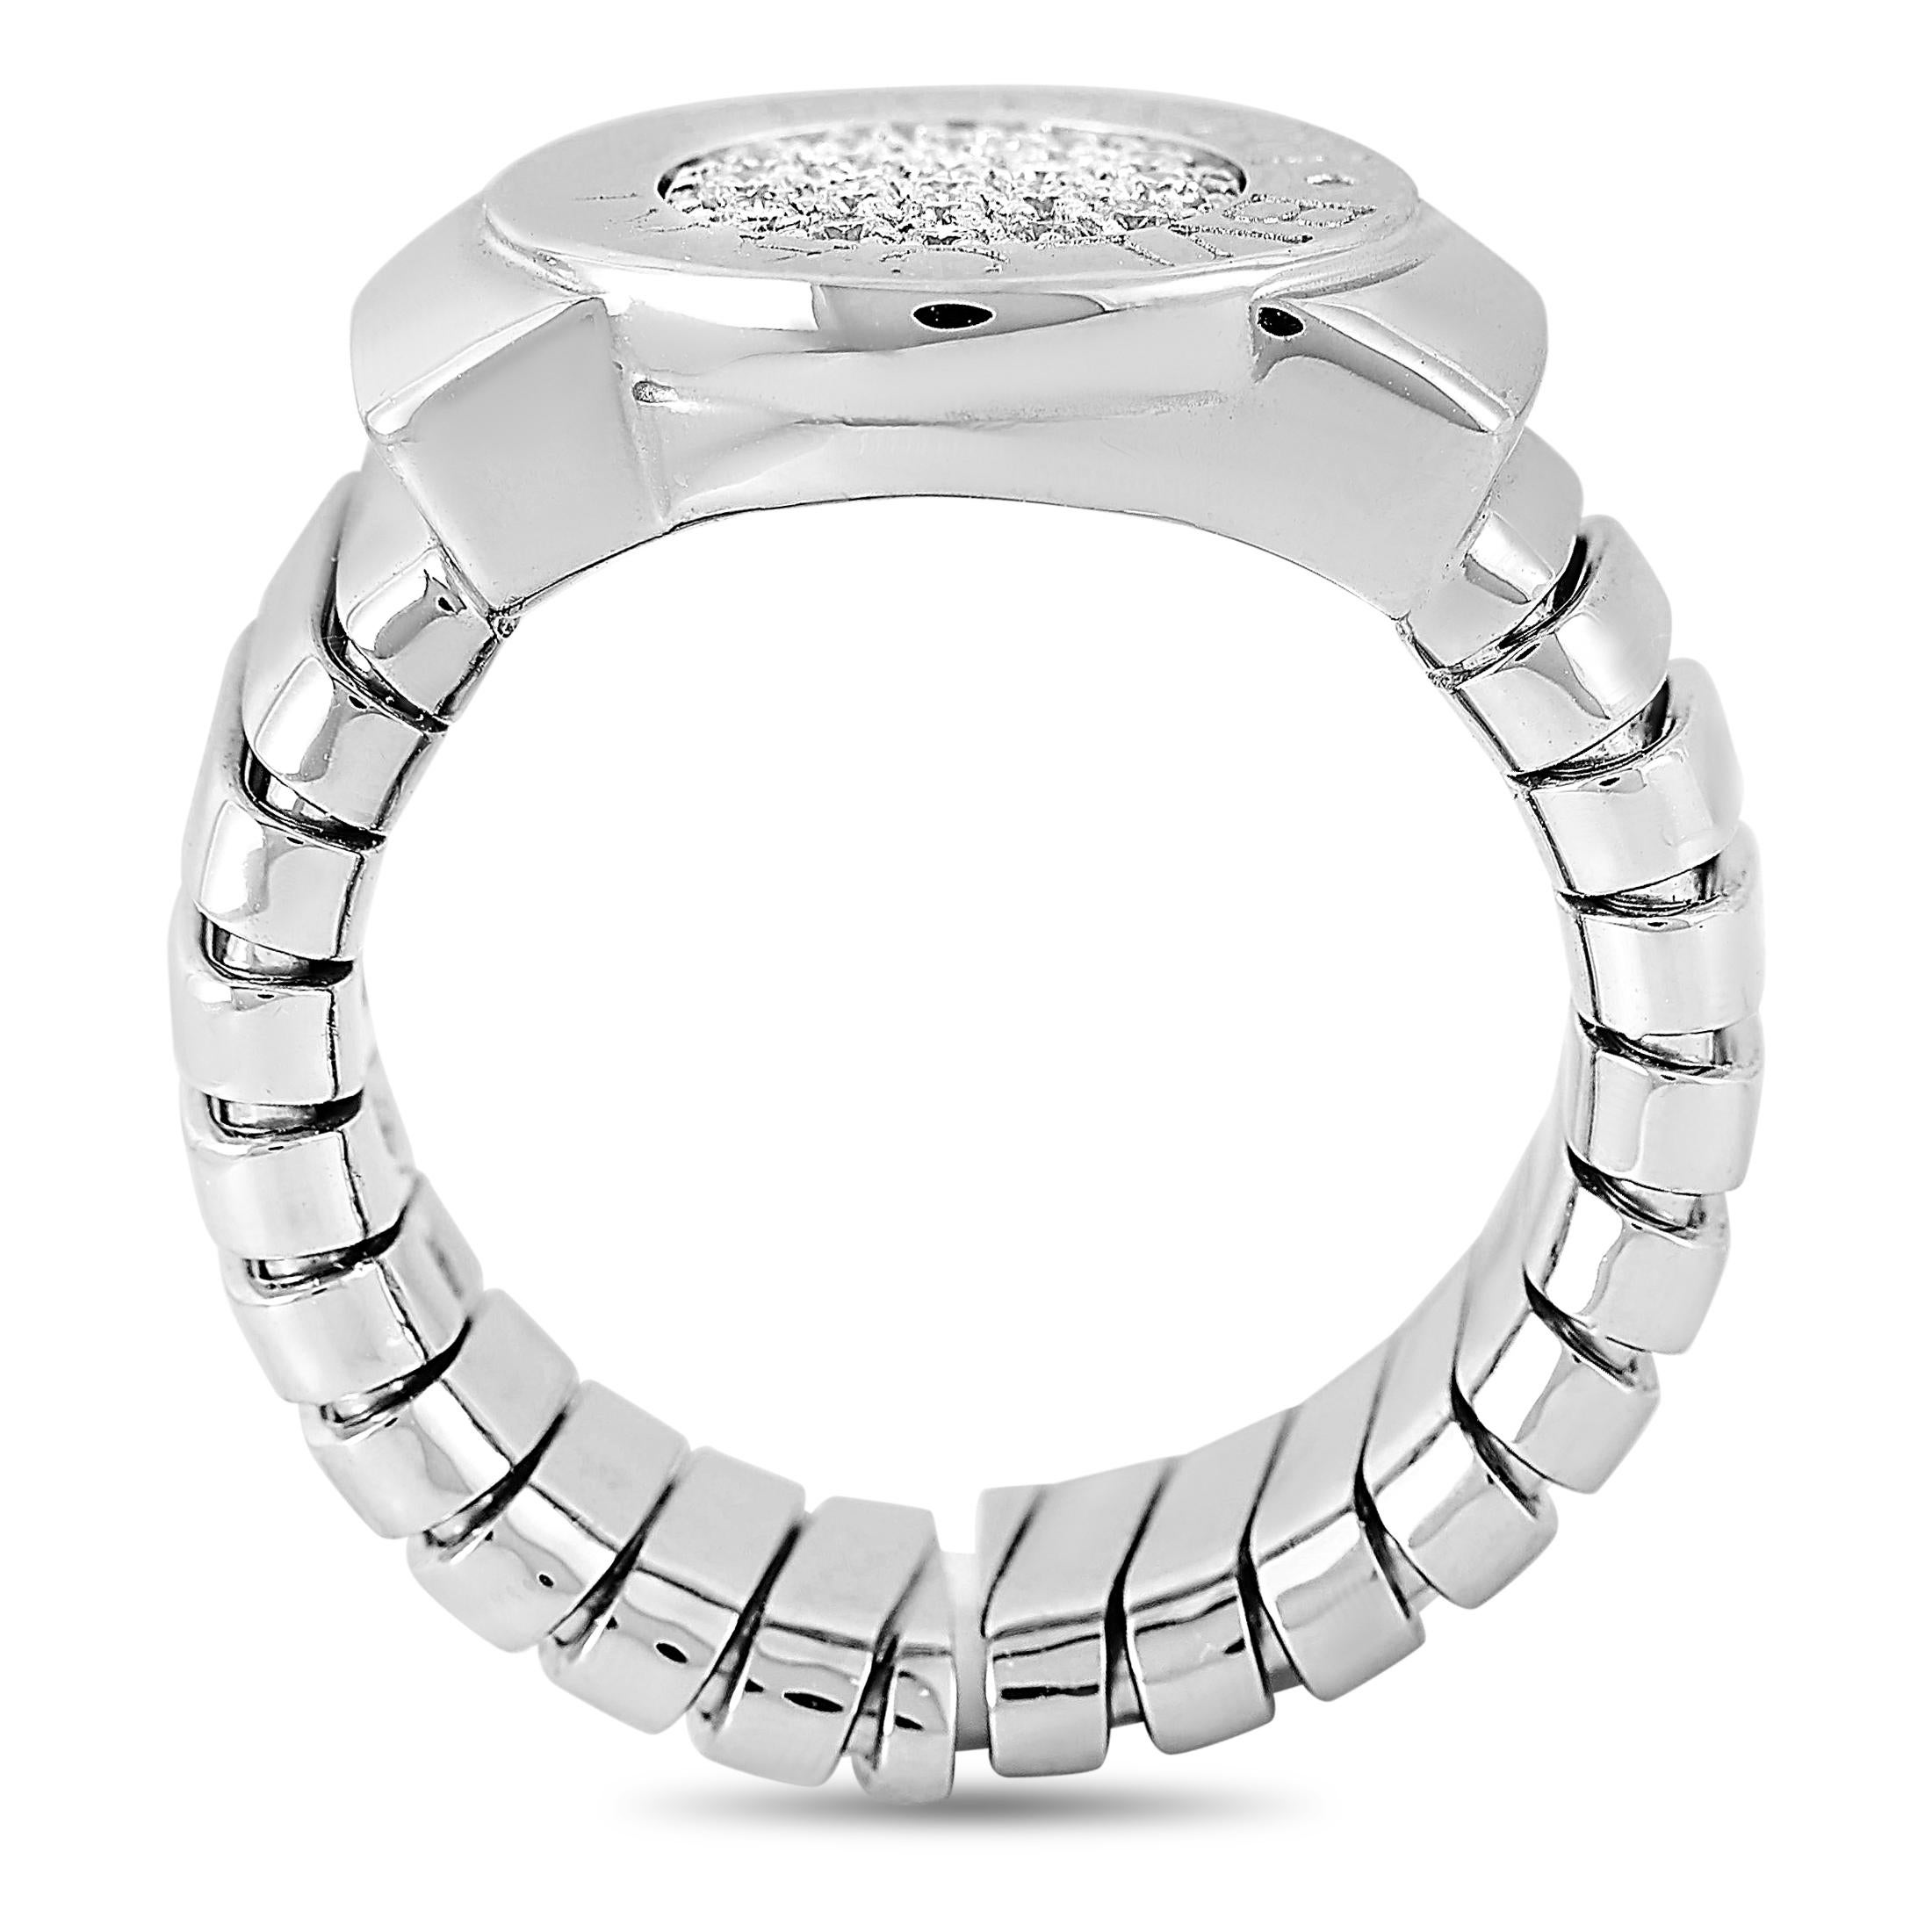 This Bvlgari tubogas ring is made of 18K white gold and embellished with diamonds that amount to 0.20 carats. The ring weighs 17.1 grams and boasts band thickness of 8 mm and top height of 3 mm, while top dimensions measure 17 by 13 mm.
 
 Offered